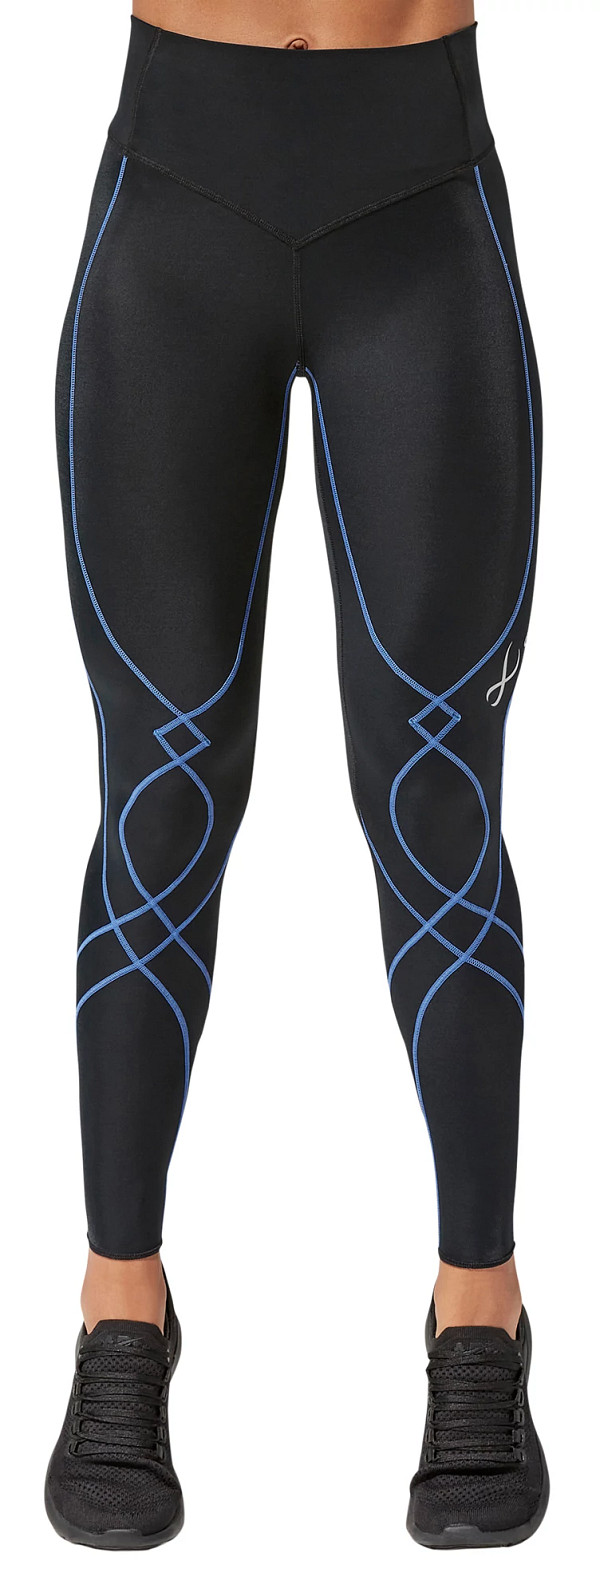 CW-X Leggings Exercise Pants for Men for sale